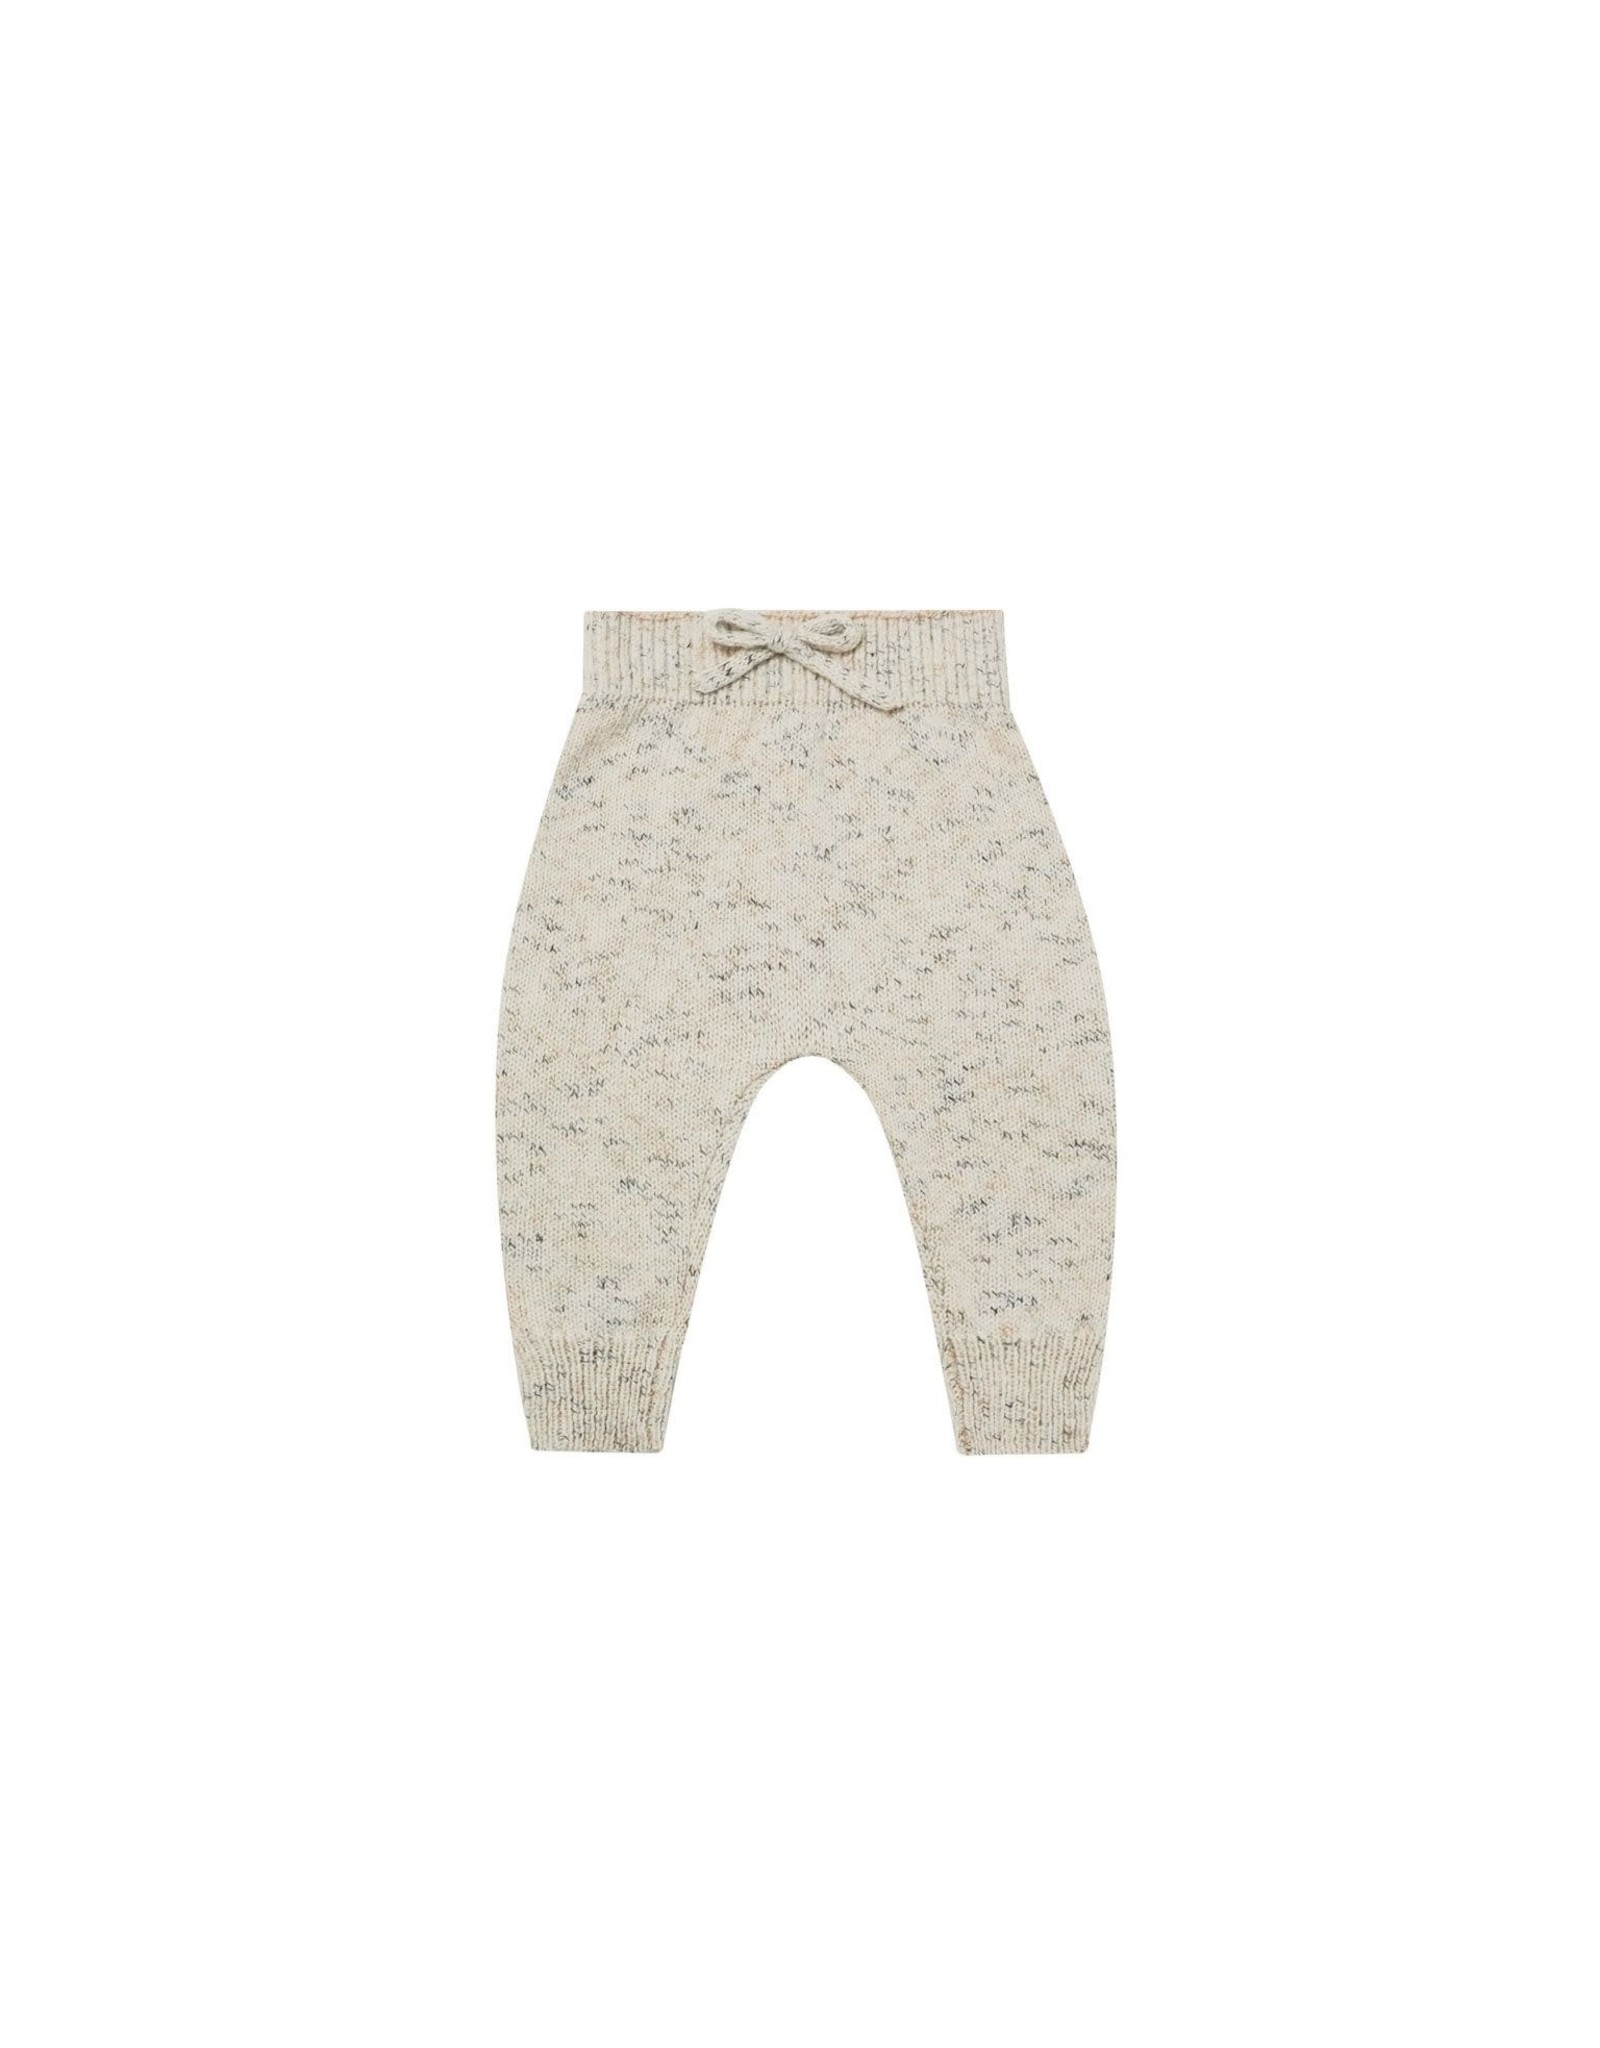 Quincy Mae speckled knit pant